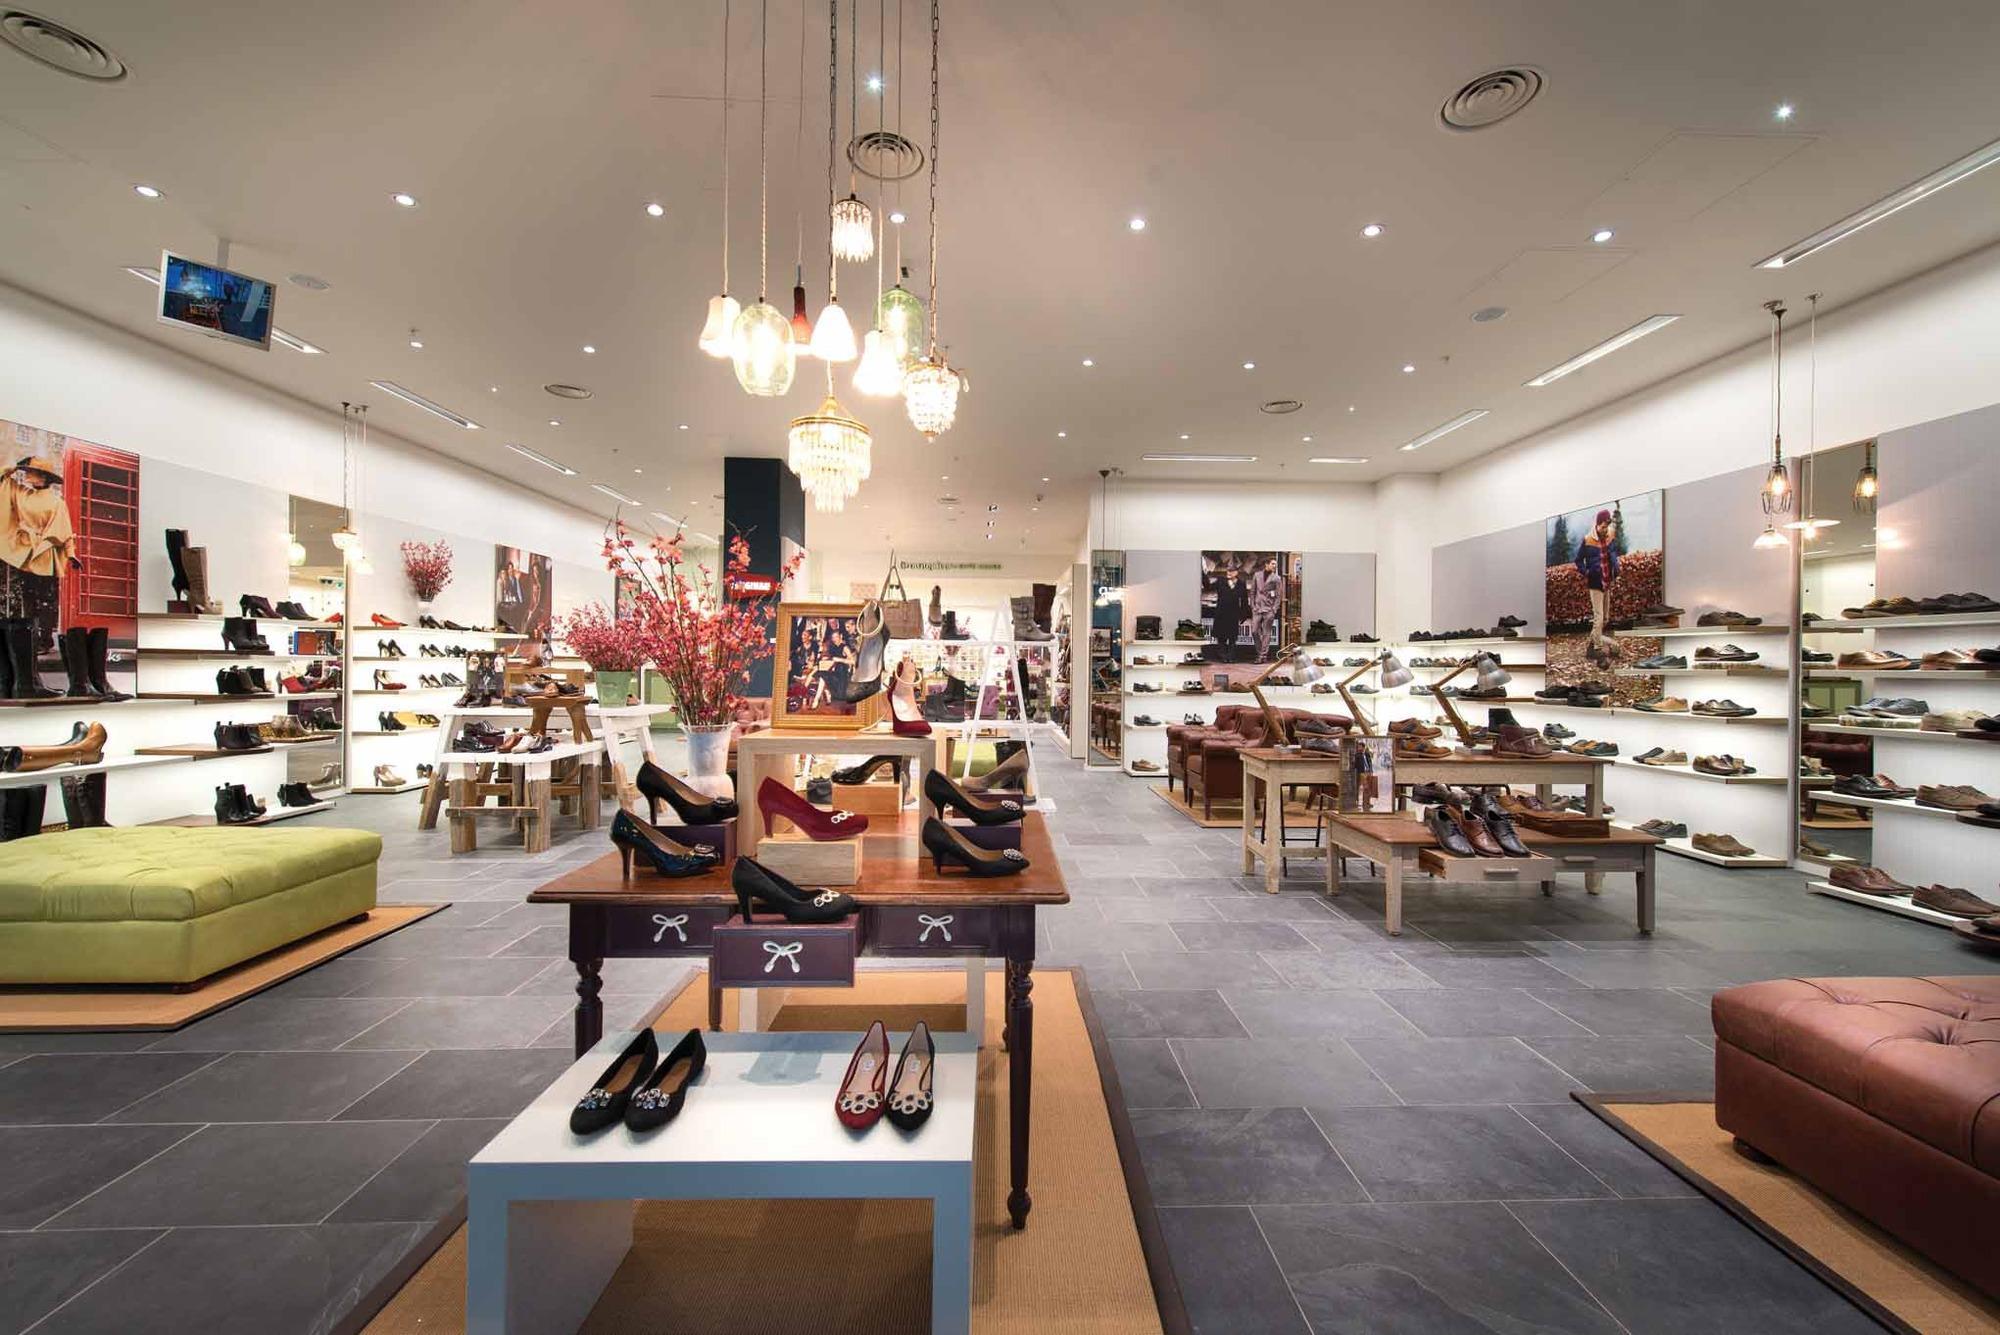 In pictures: Clarks unveils 